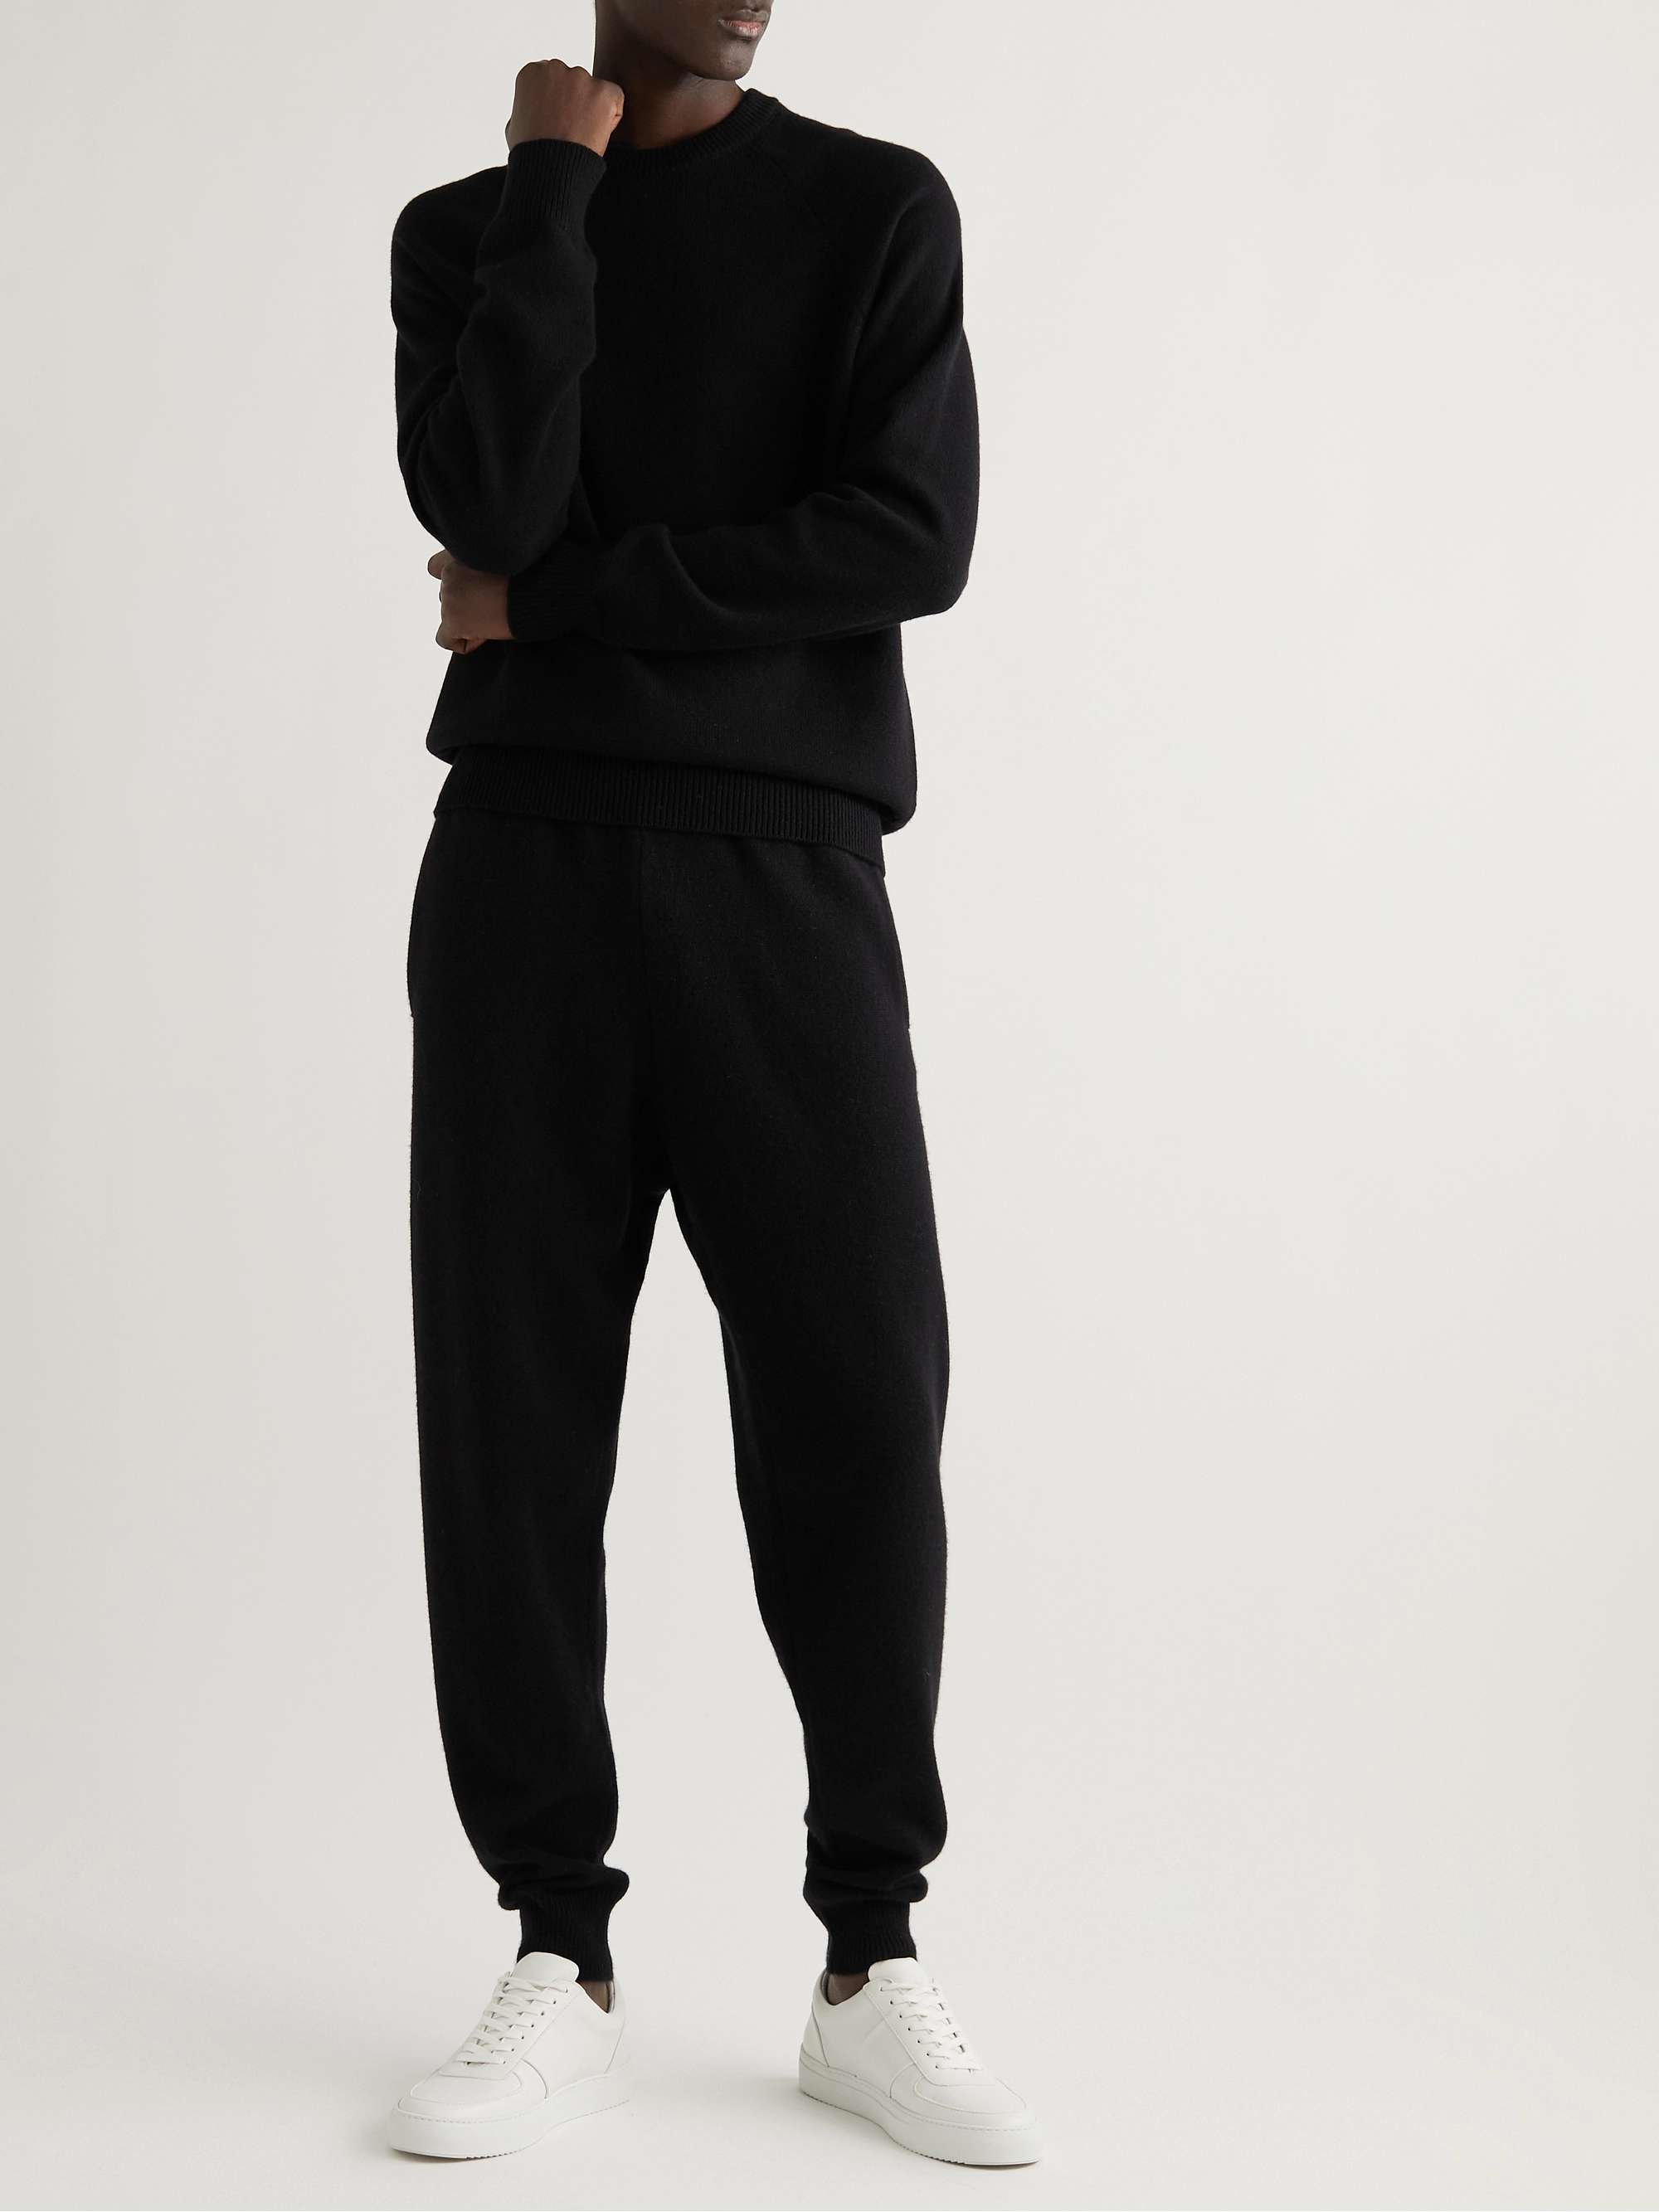 MR P. Tapered Cashmere Sweatpants for Men